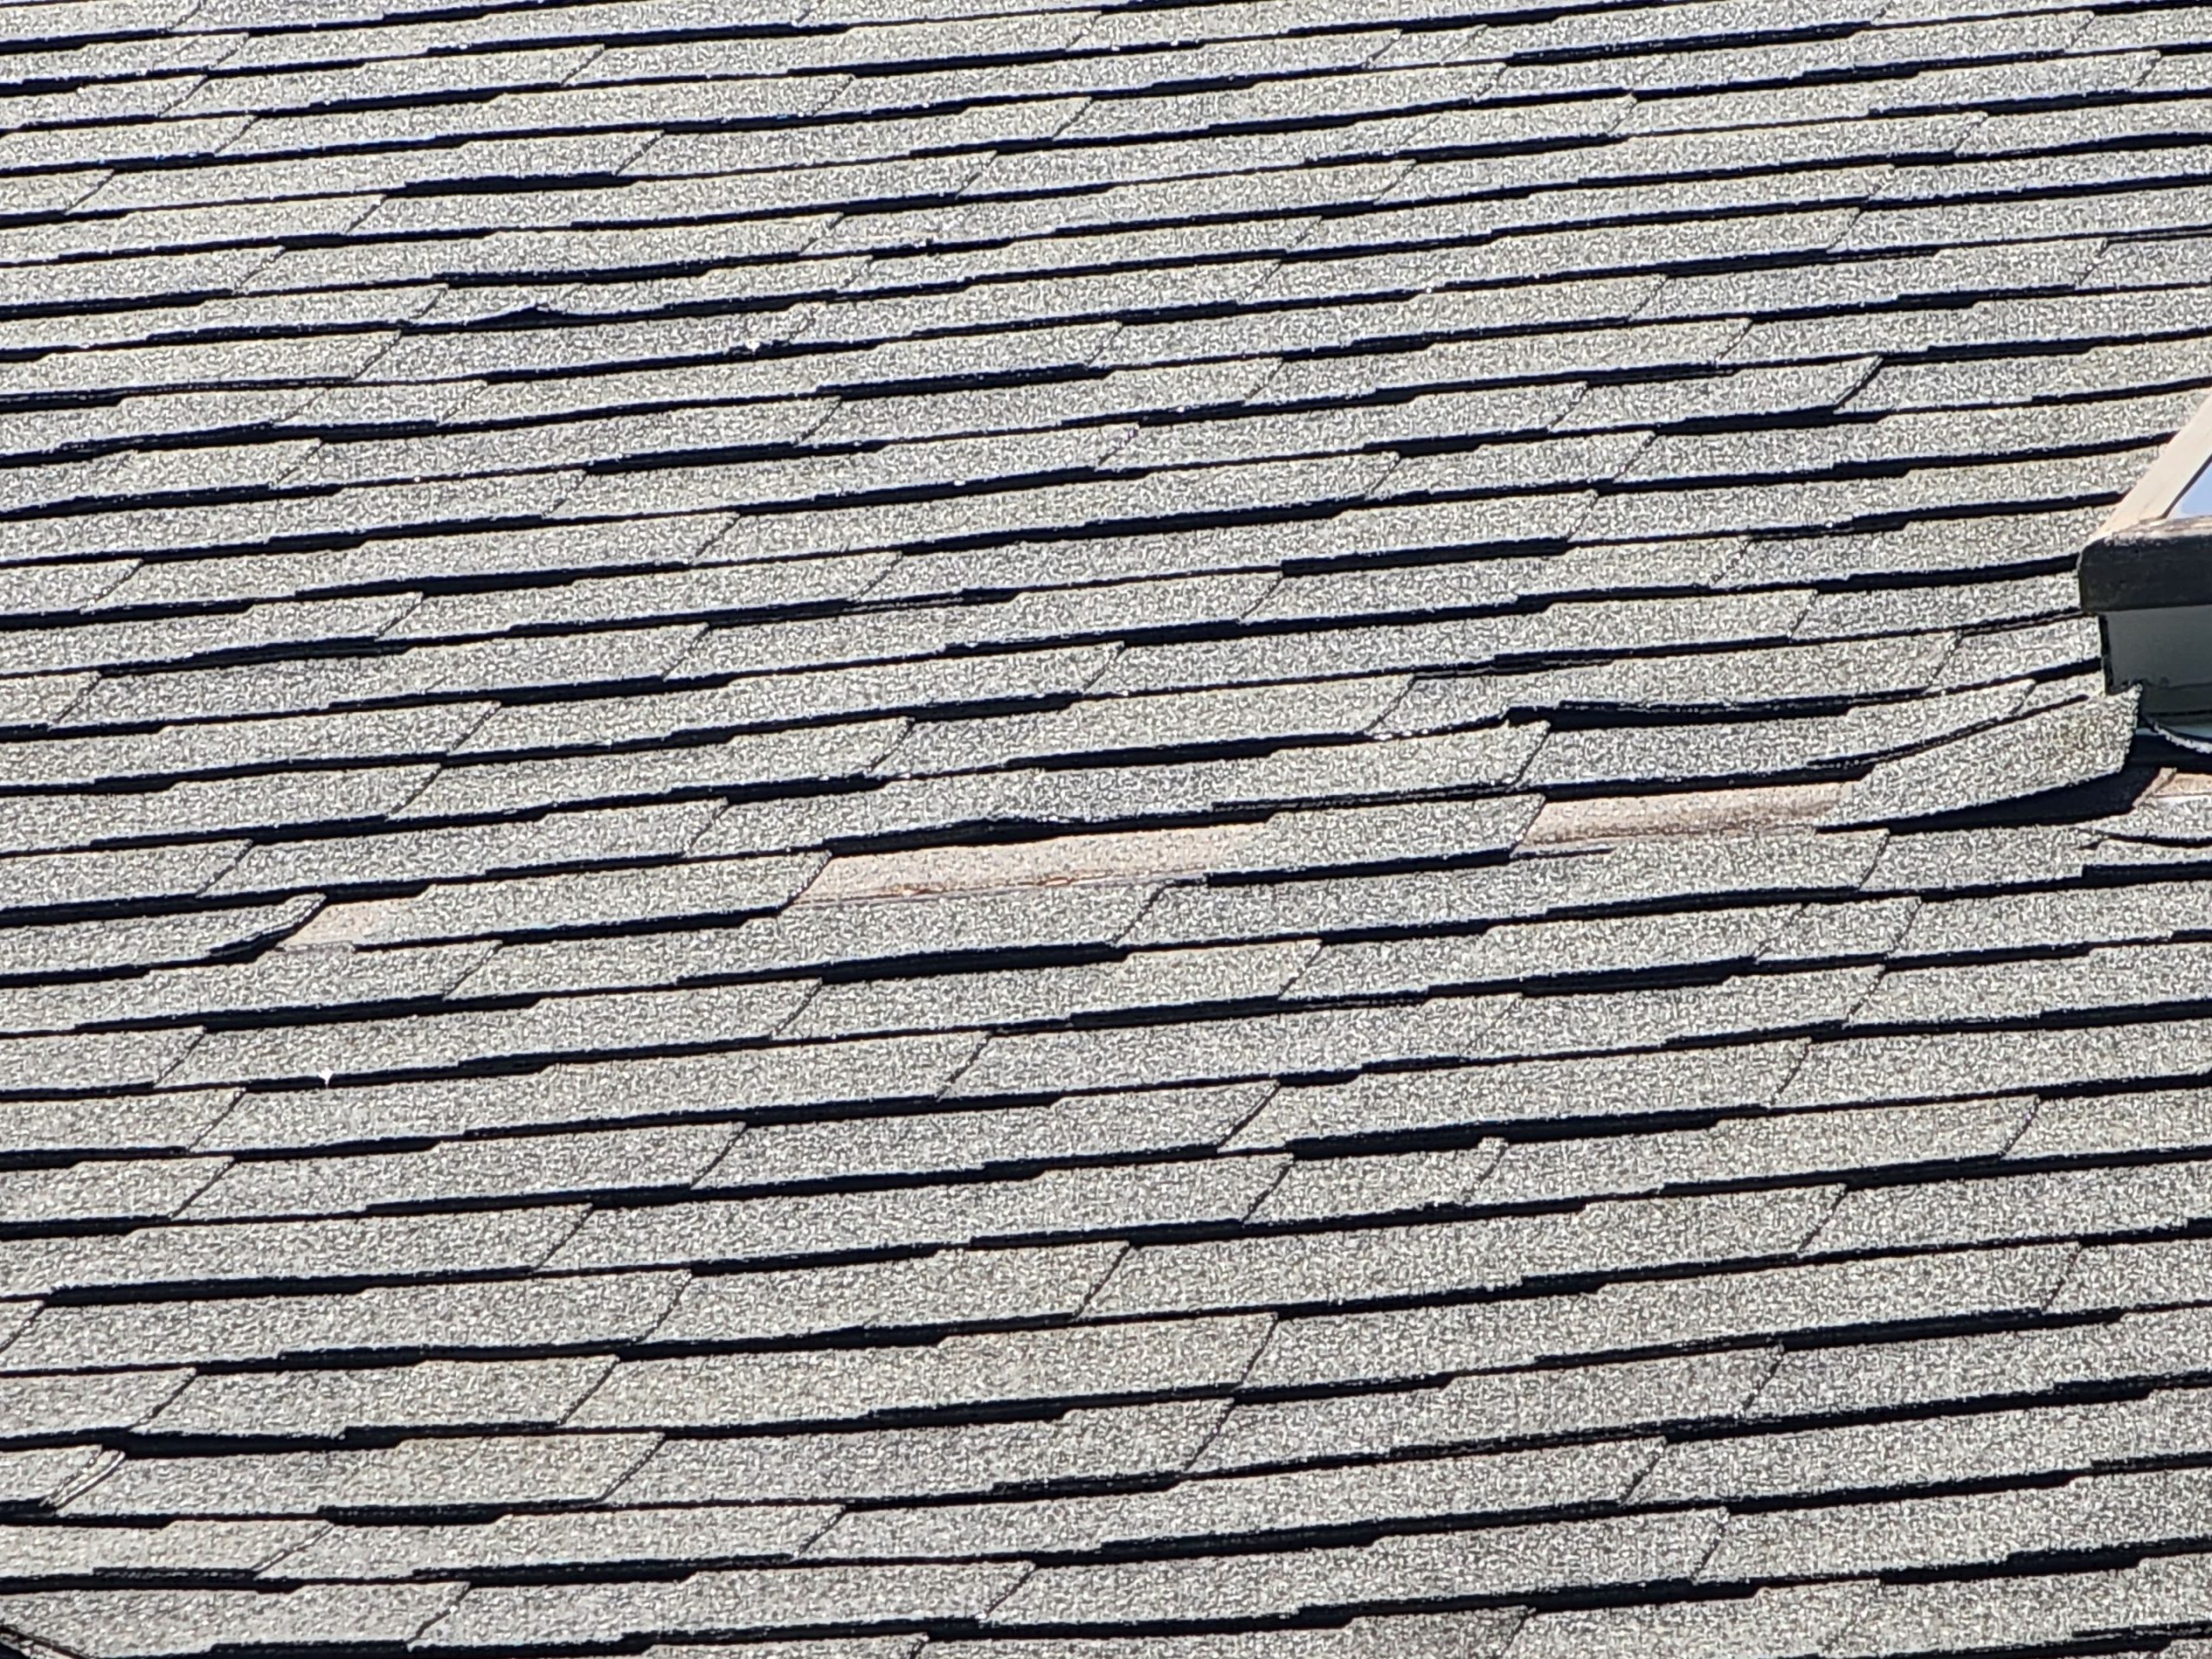 Lifted, detached shingles